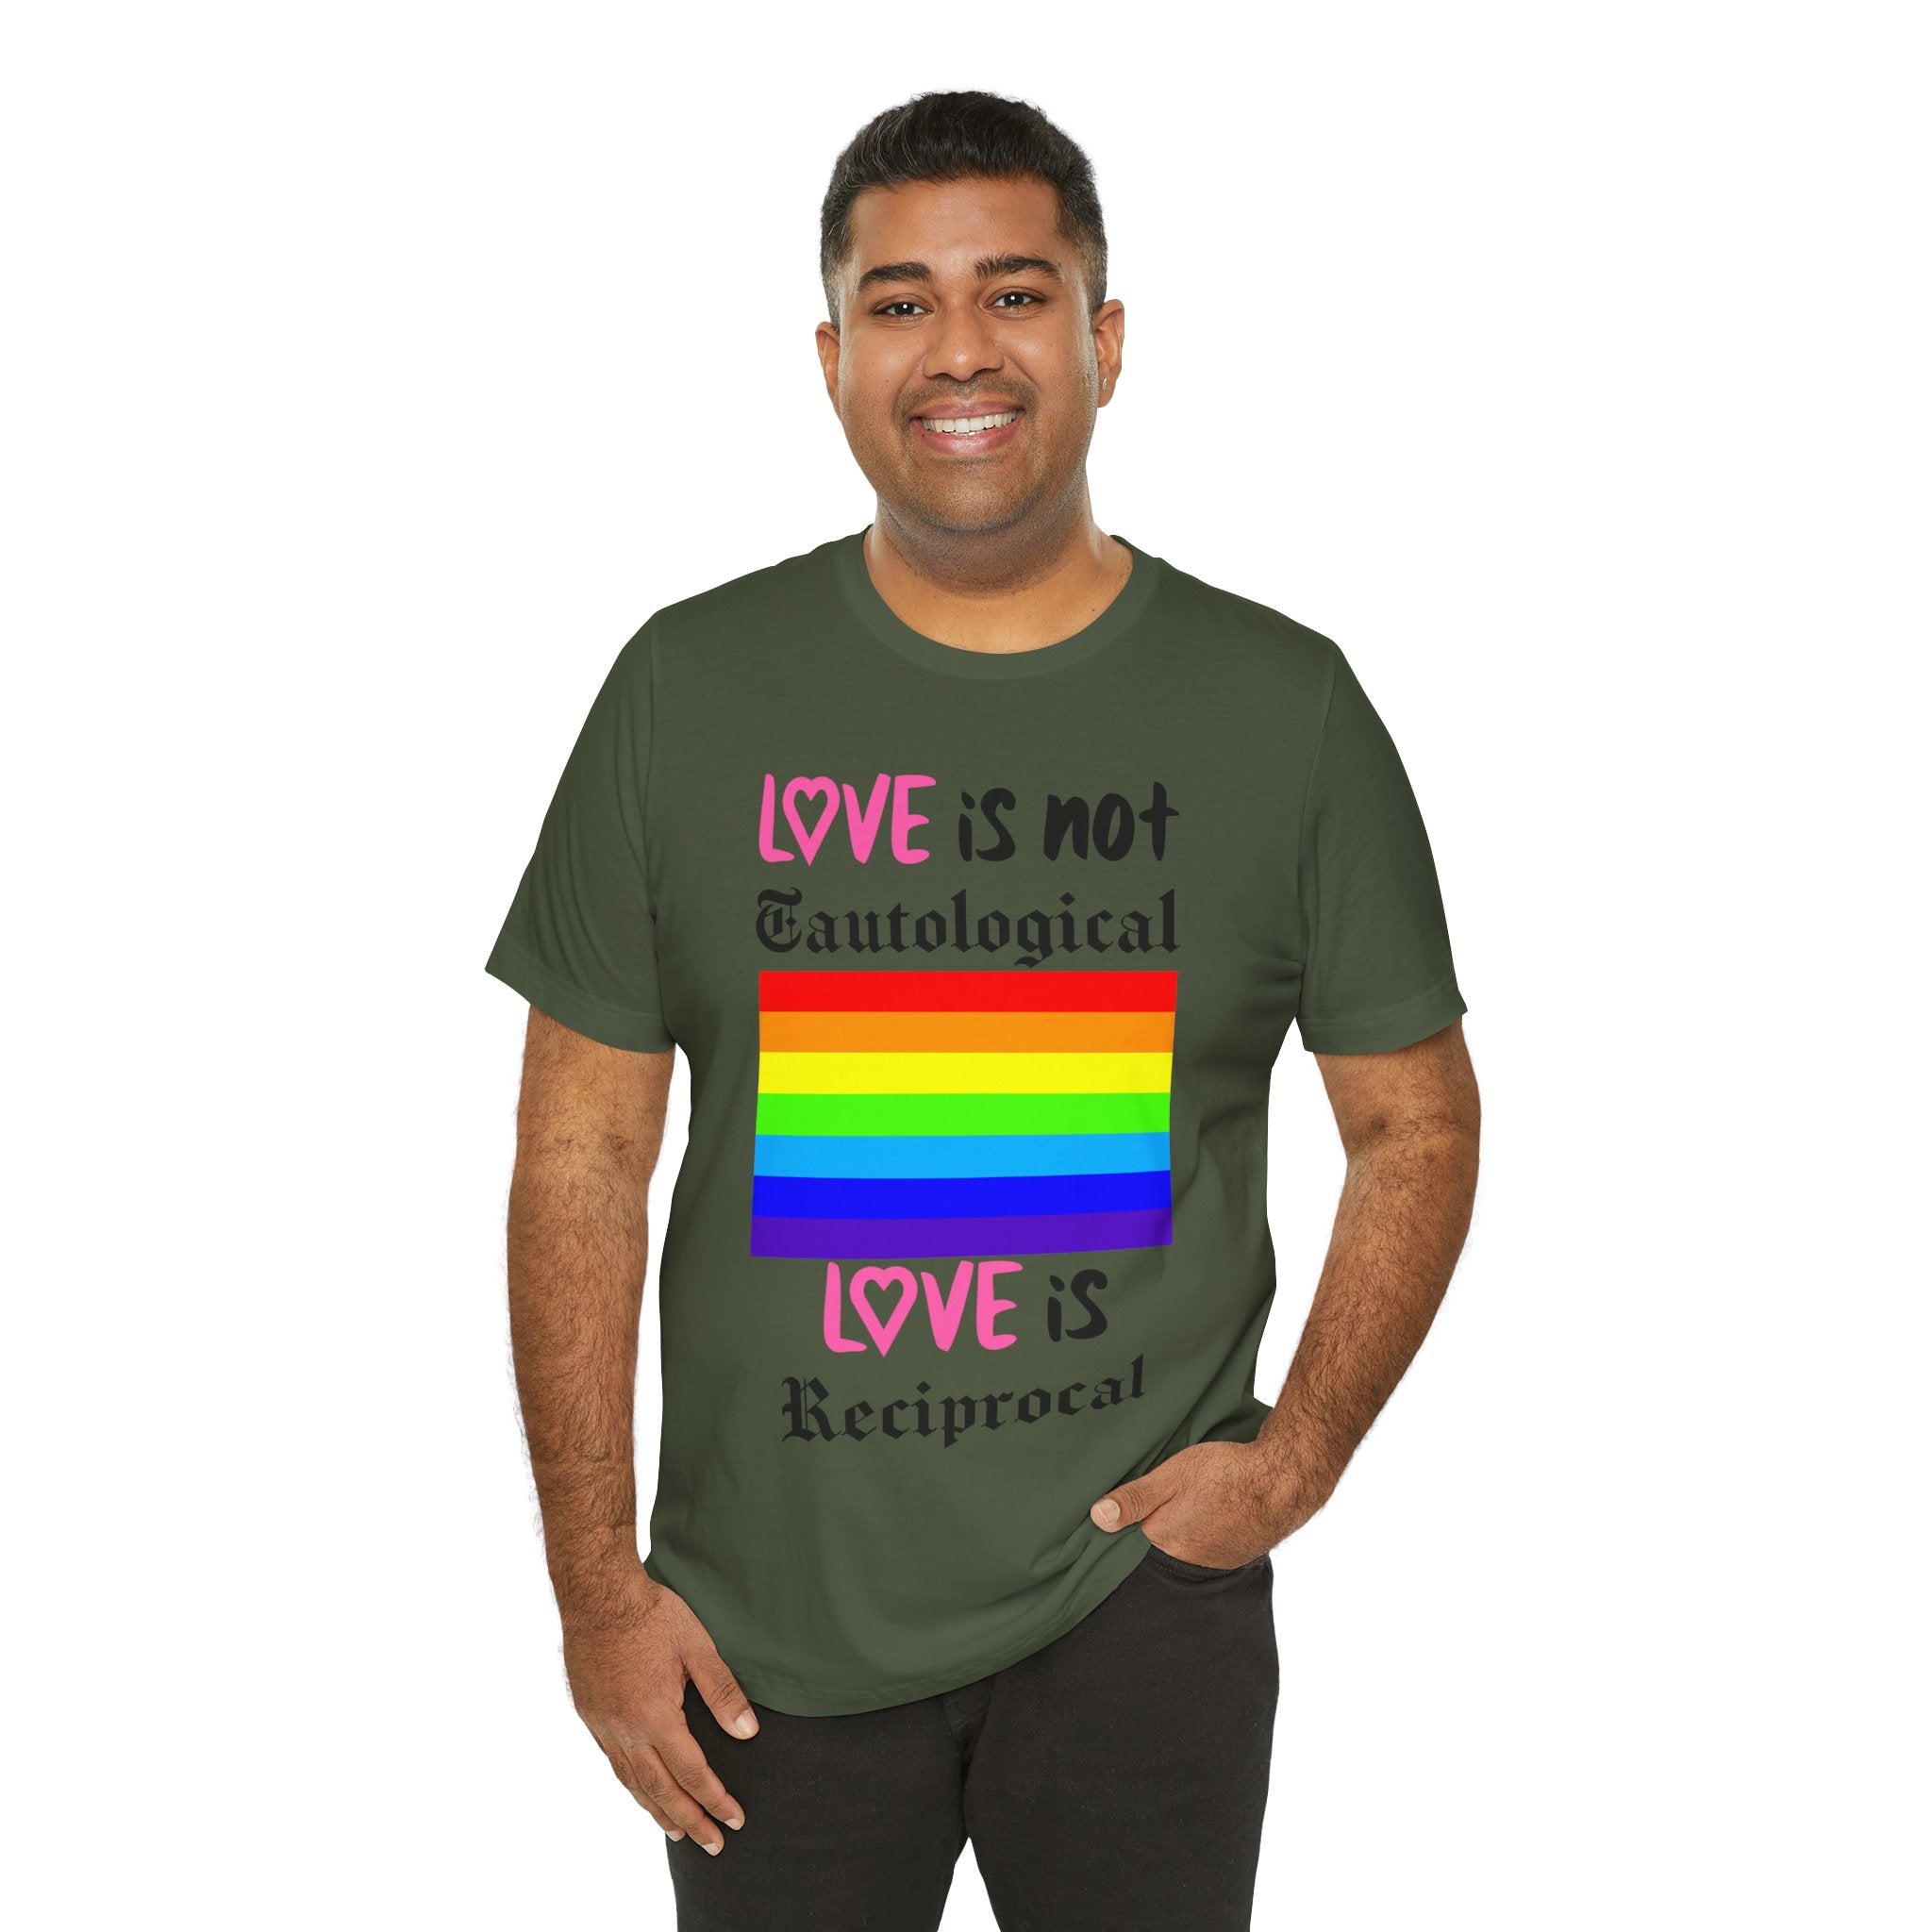 Love is Reciprocal - Spectral Colors